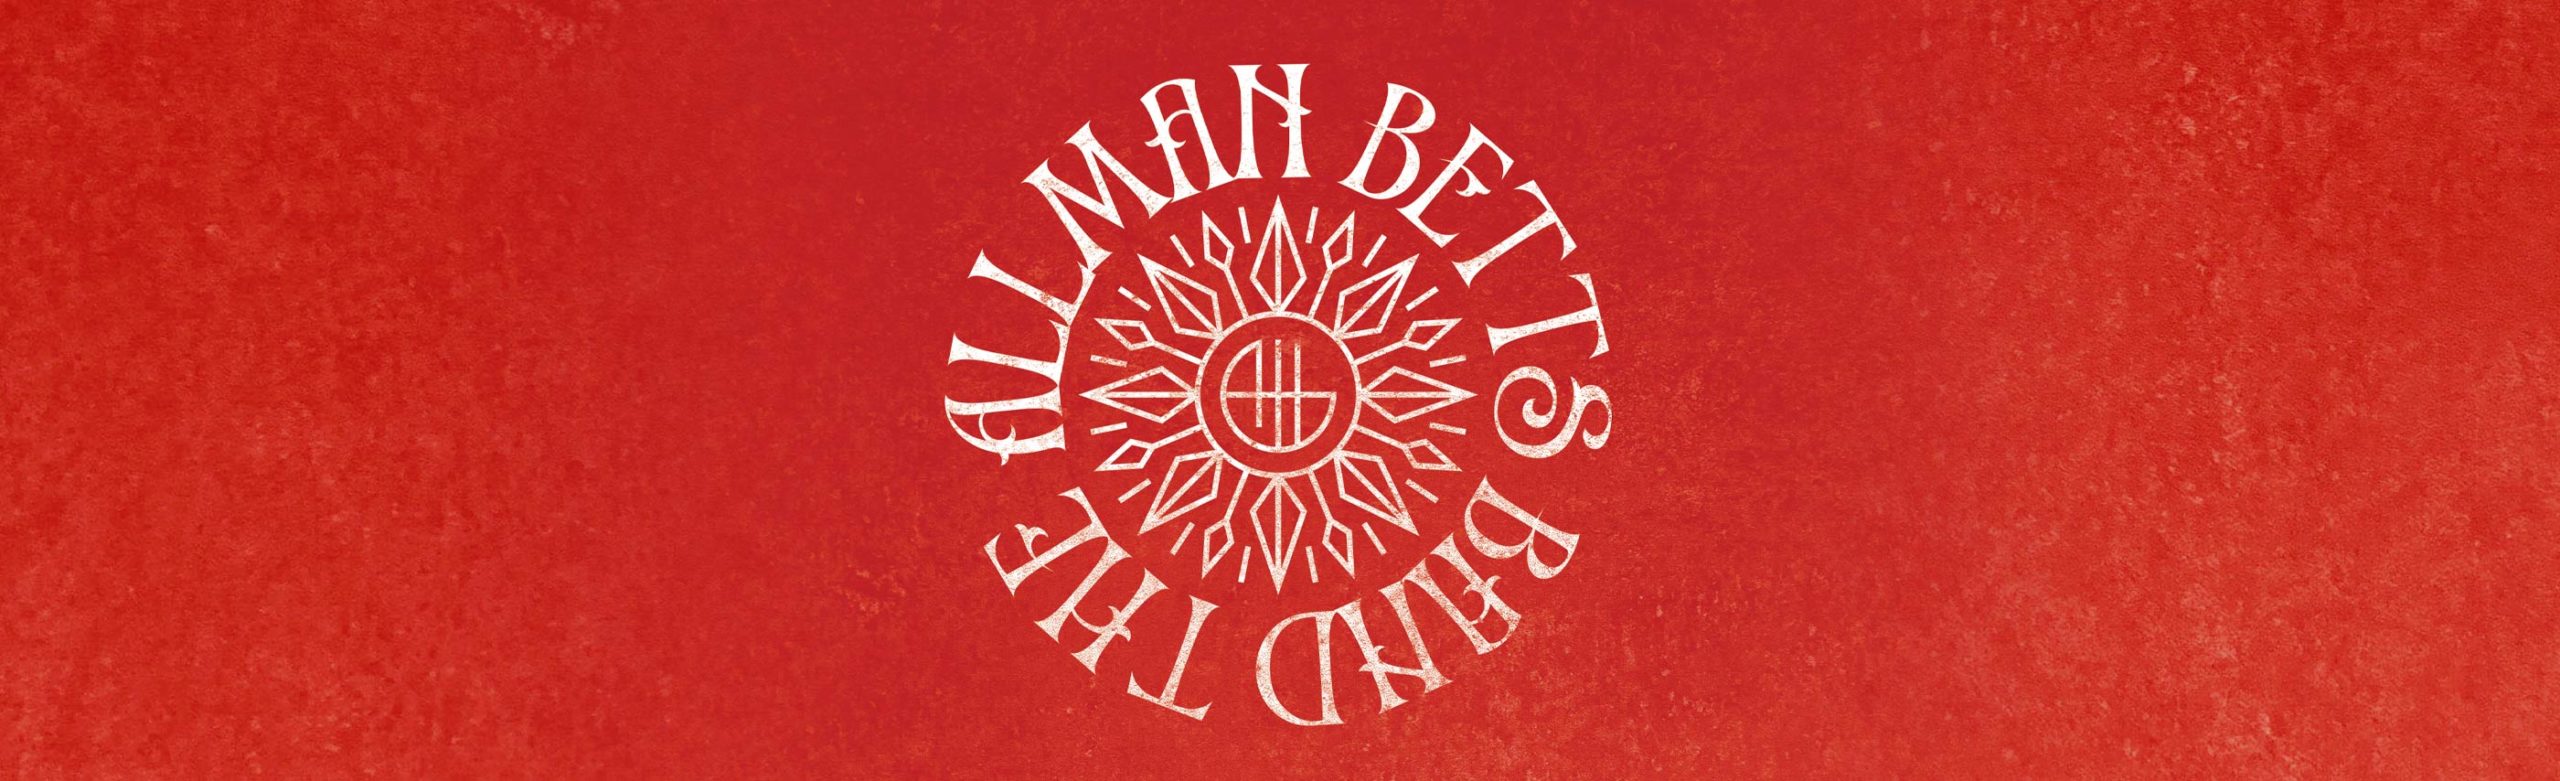 The Allman Betts Band Confirms Concert at the Wilma Image